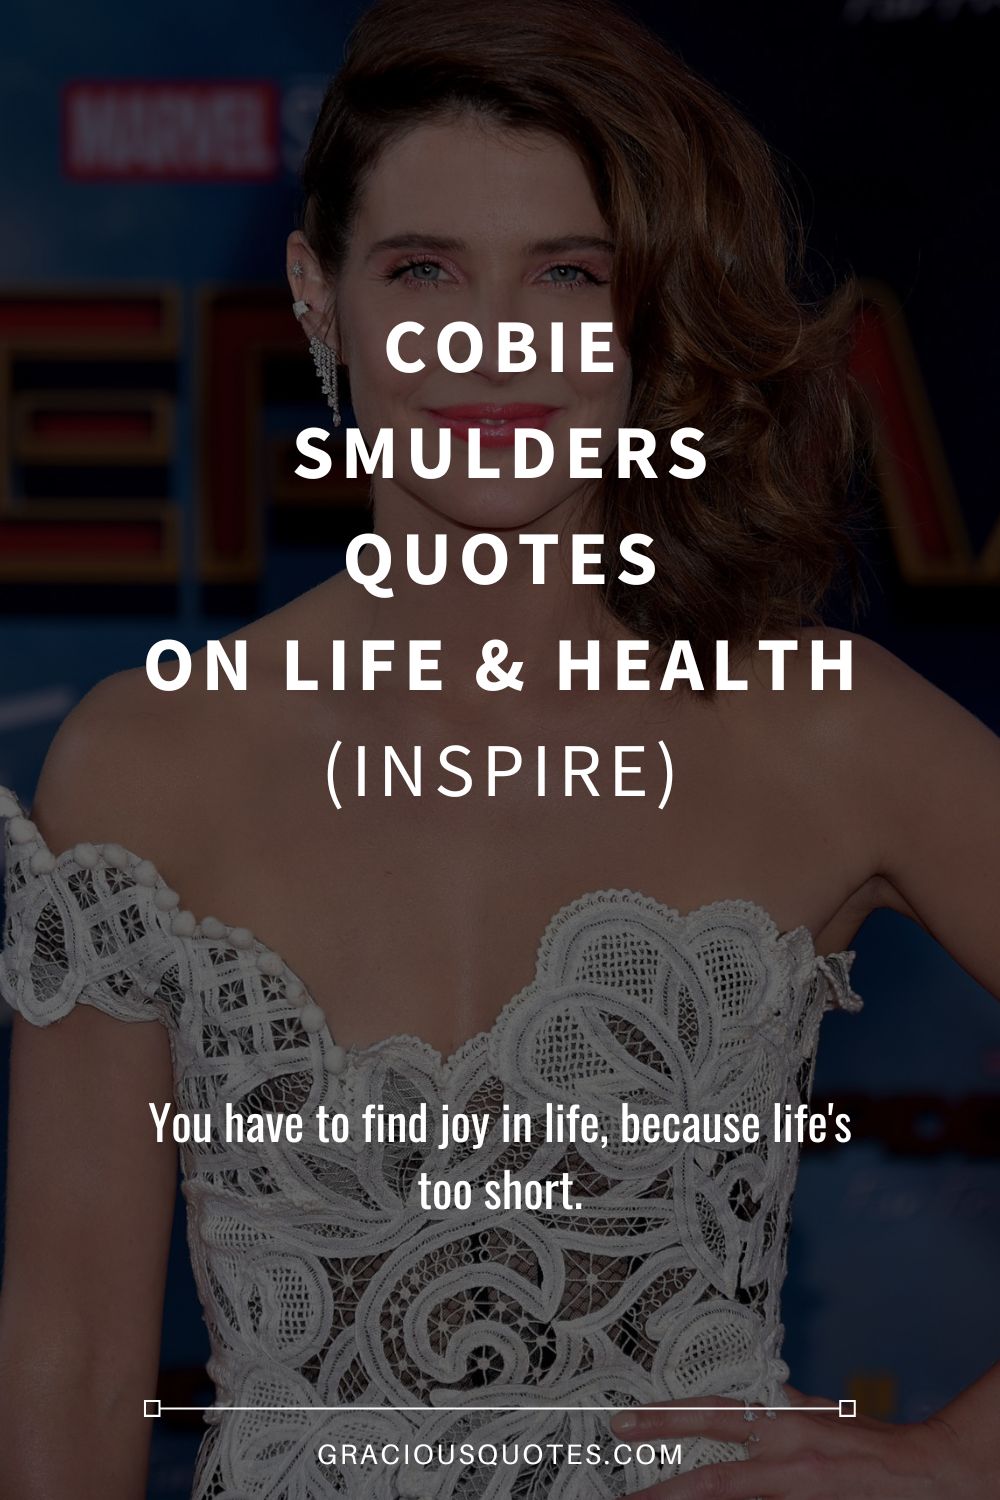 Cobie Smulders Quotes on Life & Health (INSPIRE) - Gracious Quotes